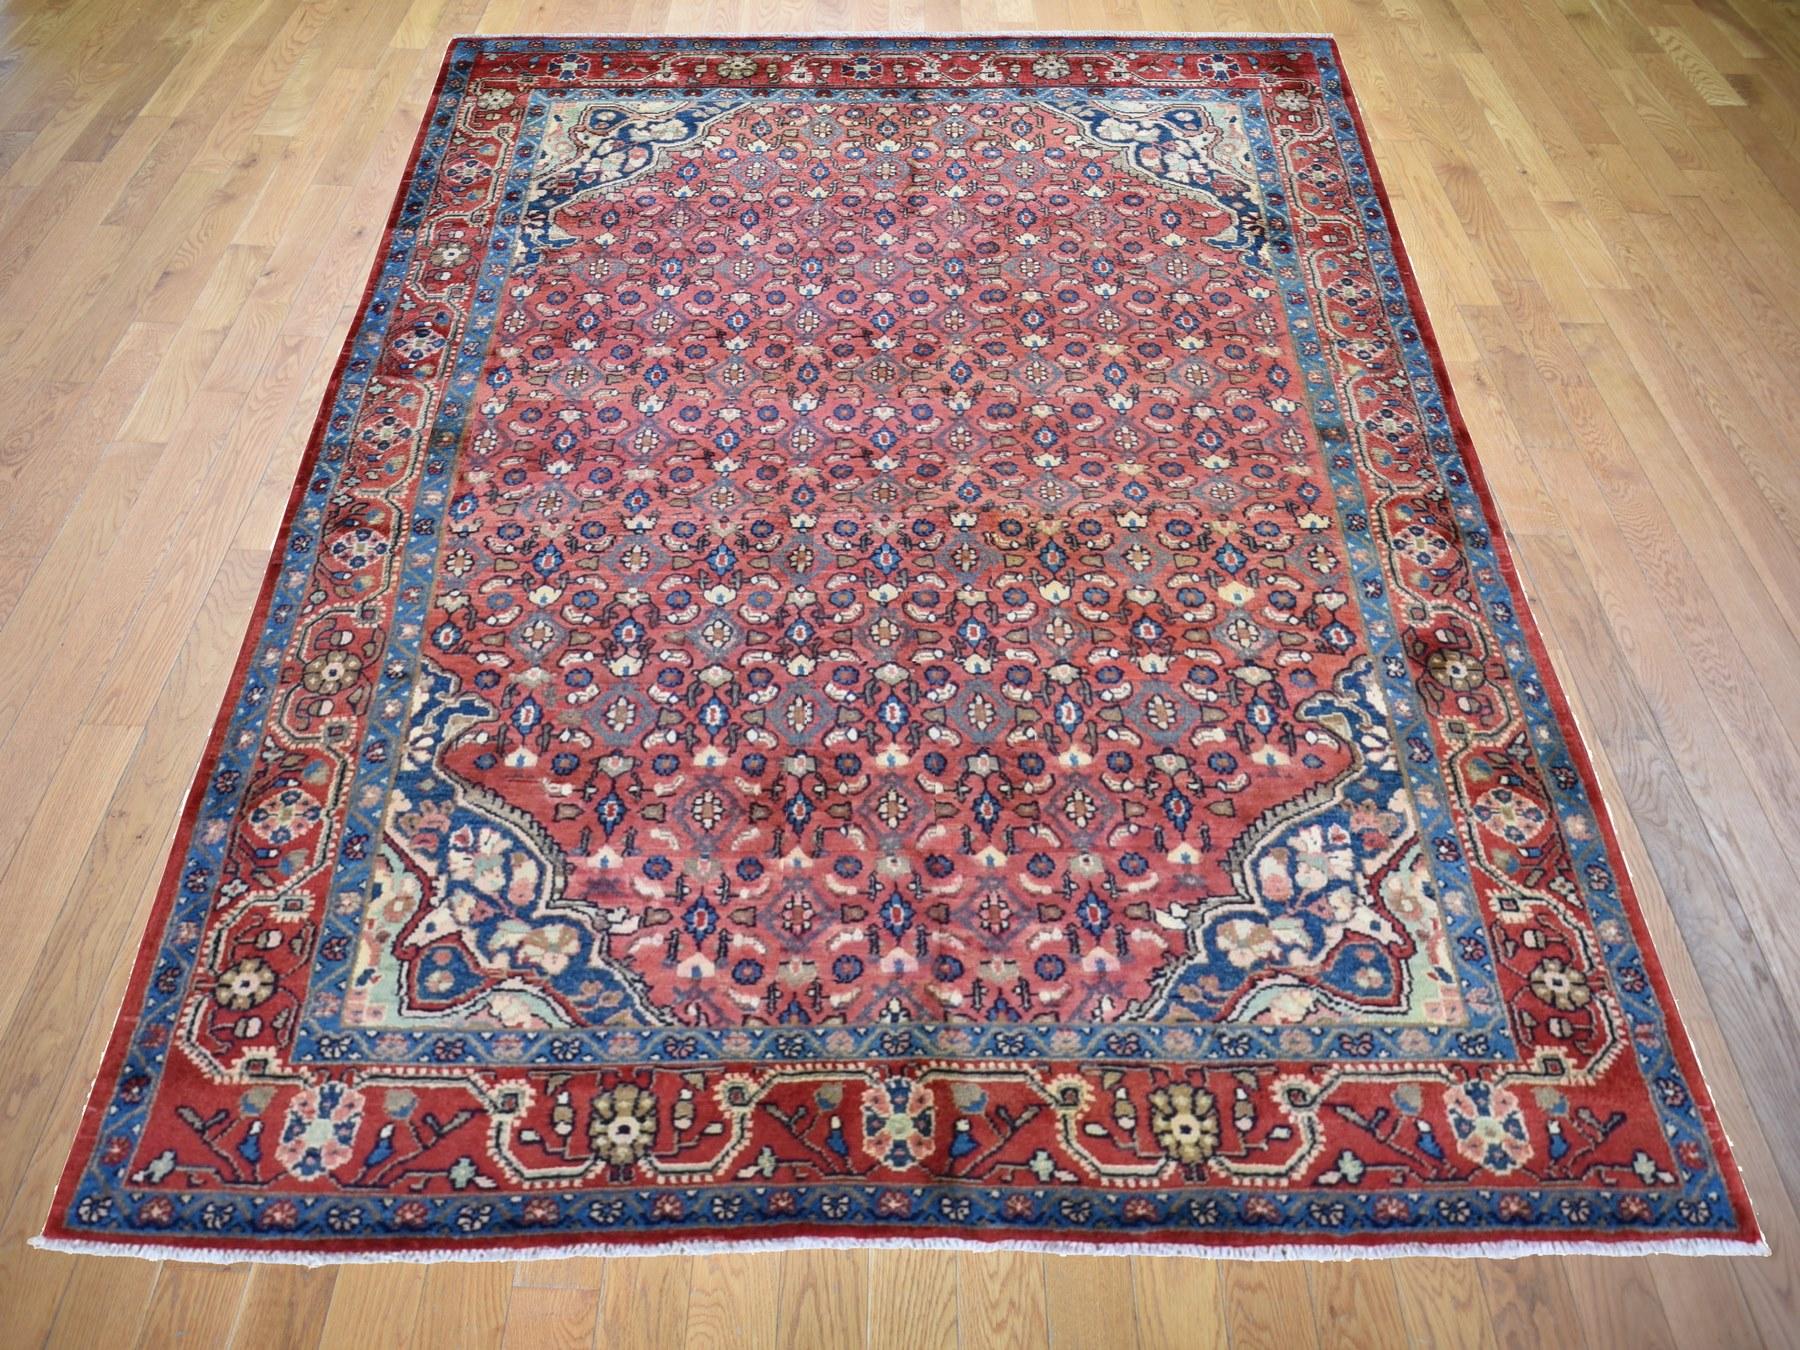 This fabulous hand knotted carpet has been created and designed for extra strength and durability. This rug has been handcrafted for weeks in the traditional method that is used to make Rugs. This is truly a one-of-kind piece.  Measures: 5'5